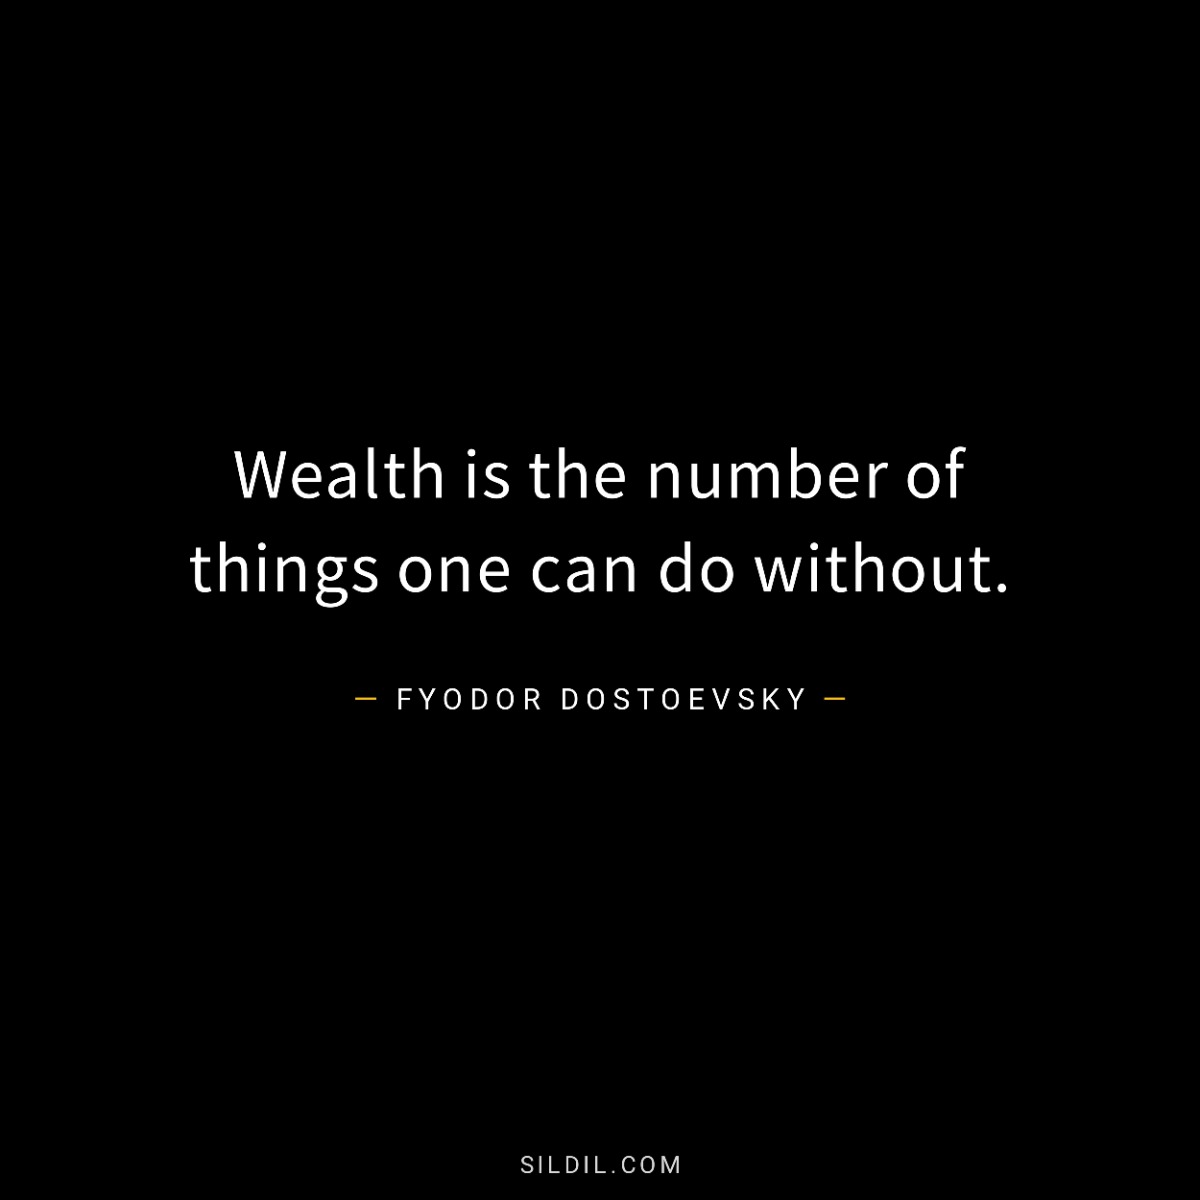 Wealth is the number of things one can do without.